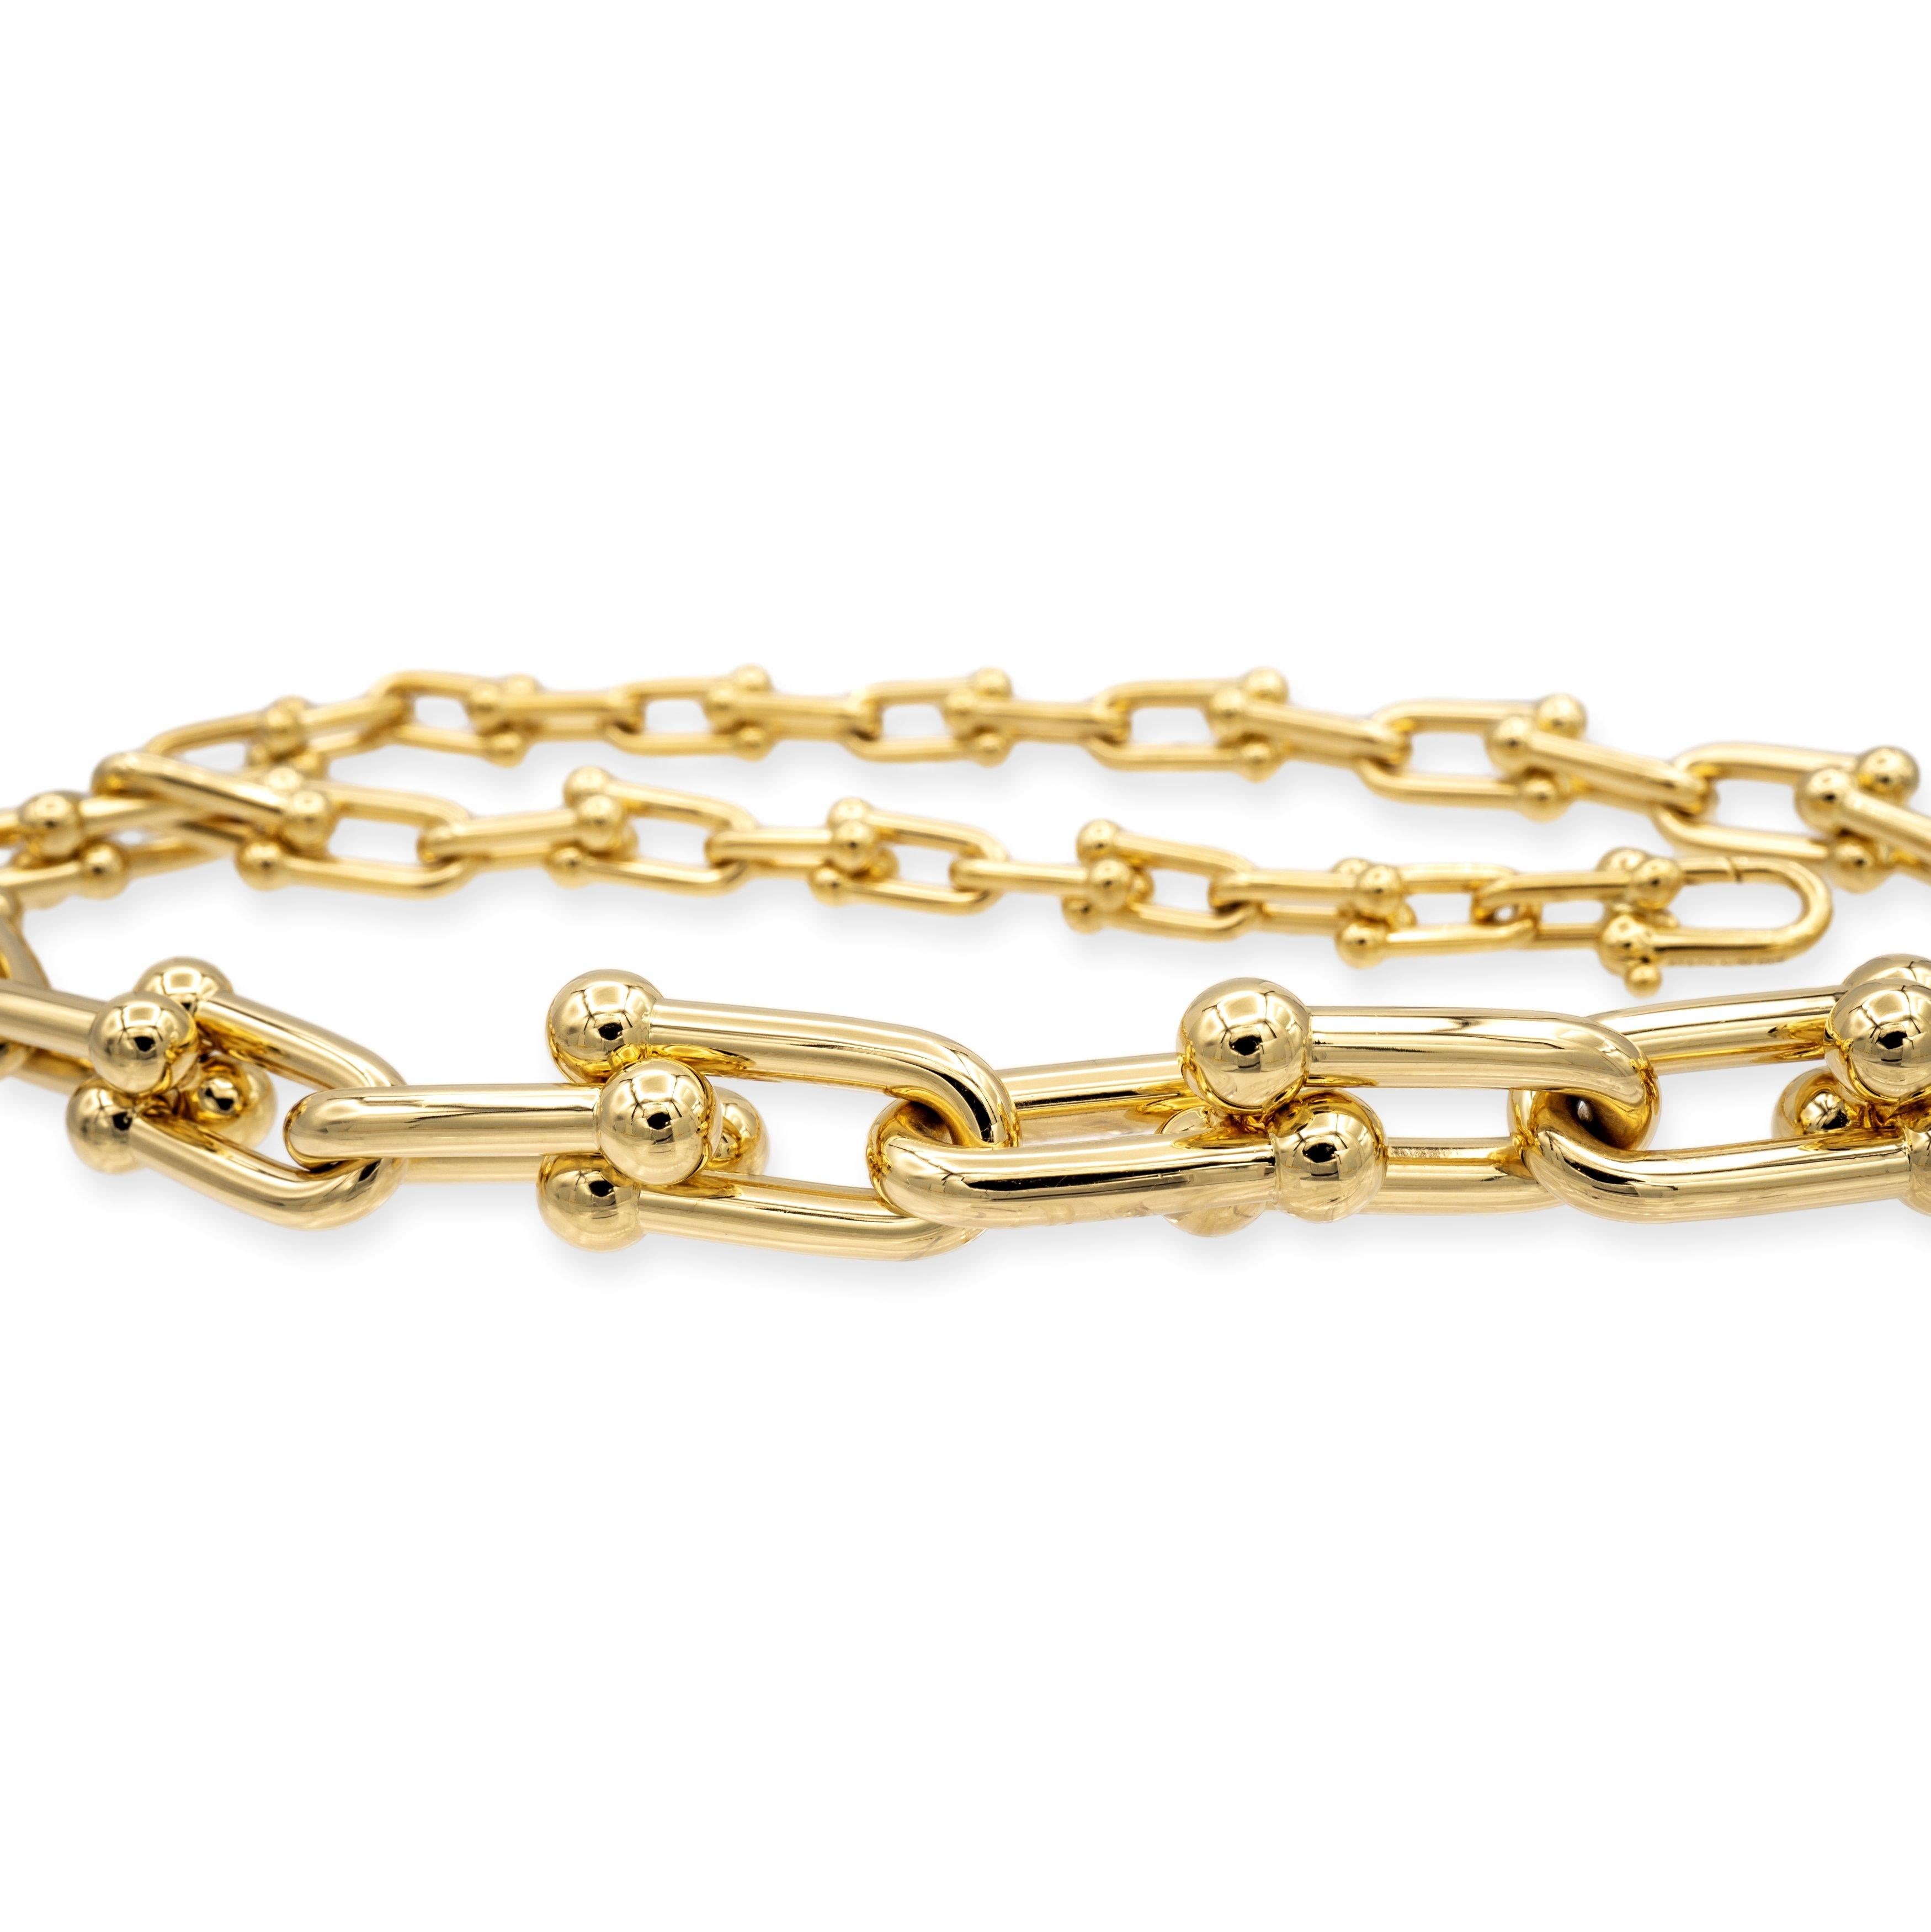 Tiffany & Co. large interlocking graduated link necklace from the Hardwear collection representing a bold and contemporary style that embodies modern sophistication, finely crafted in 18 Karat Yellow Gold Link weighing  52.7 grams grams and